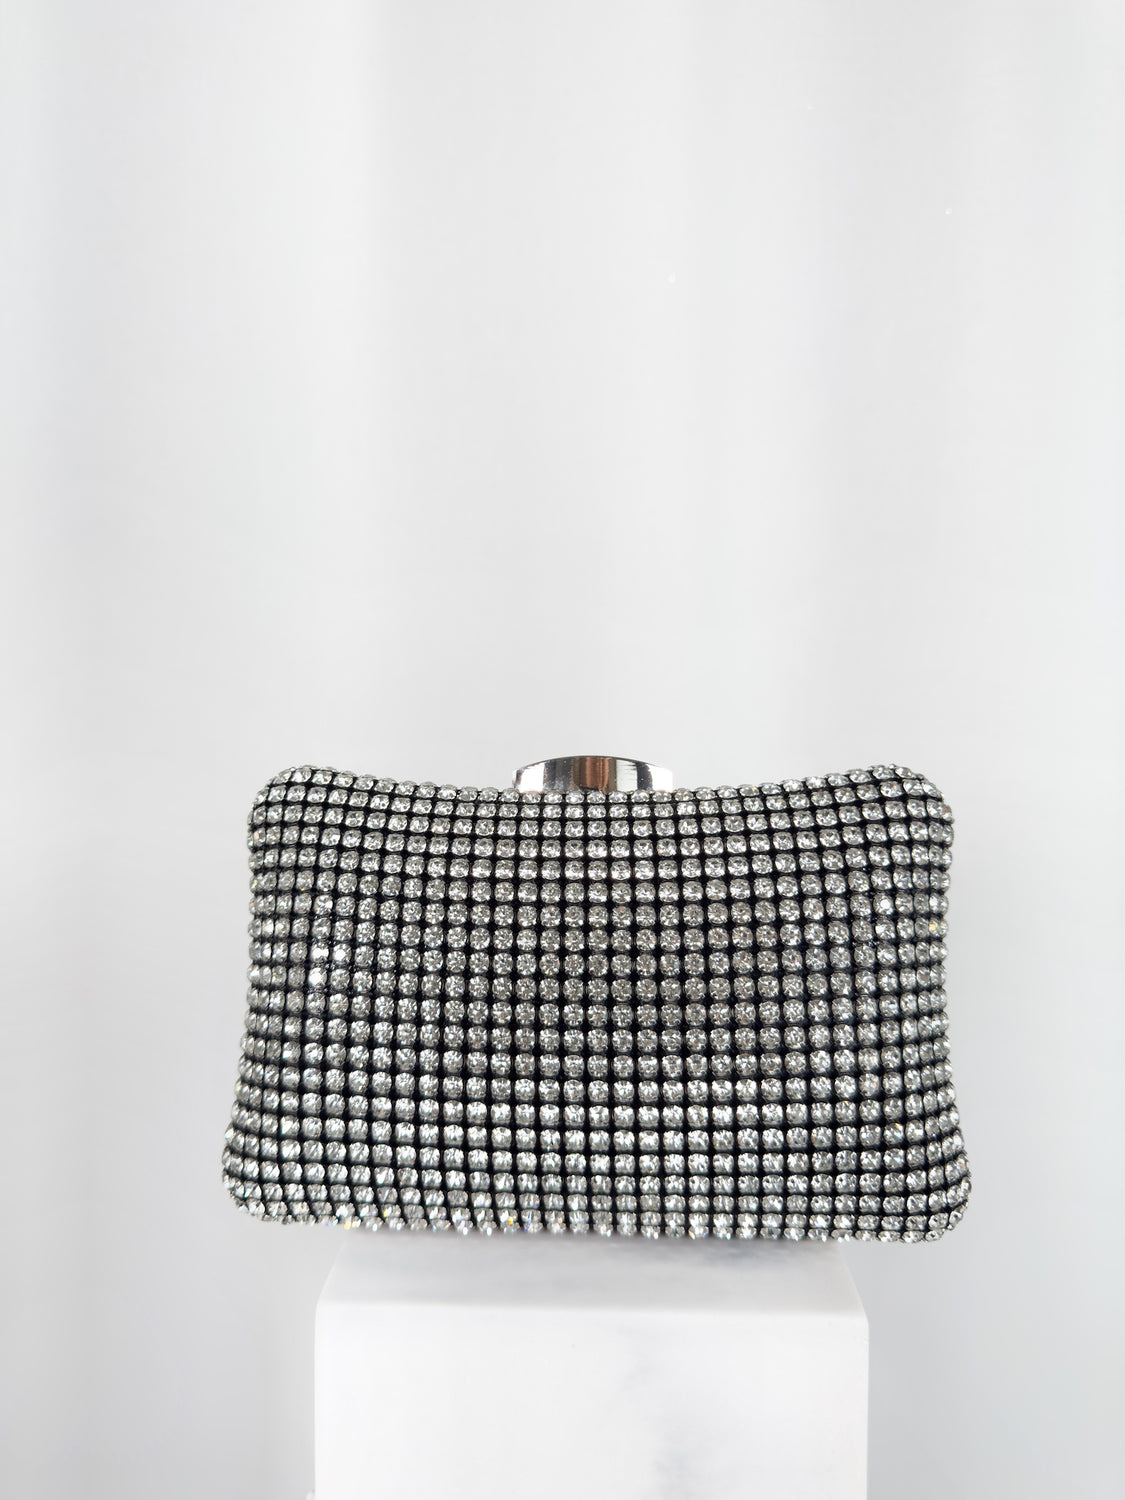 Clutch Bag with Silver Stones - Black